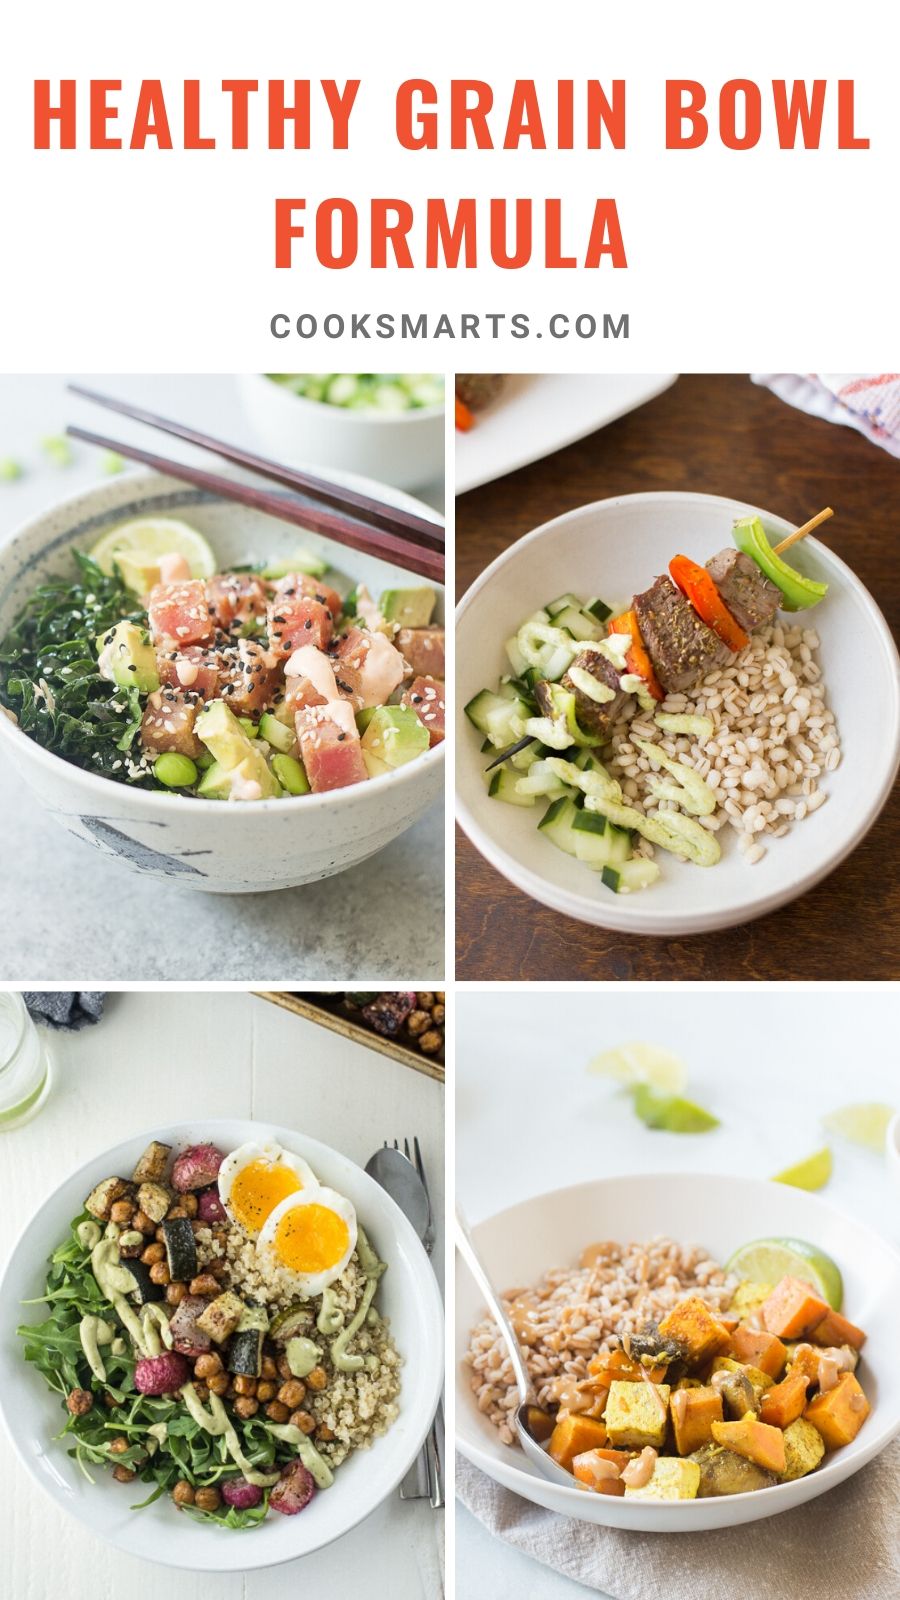 How to Make Grain Bowls | Cook Smarts